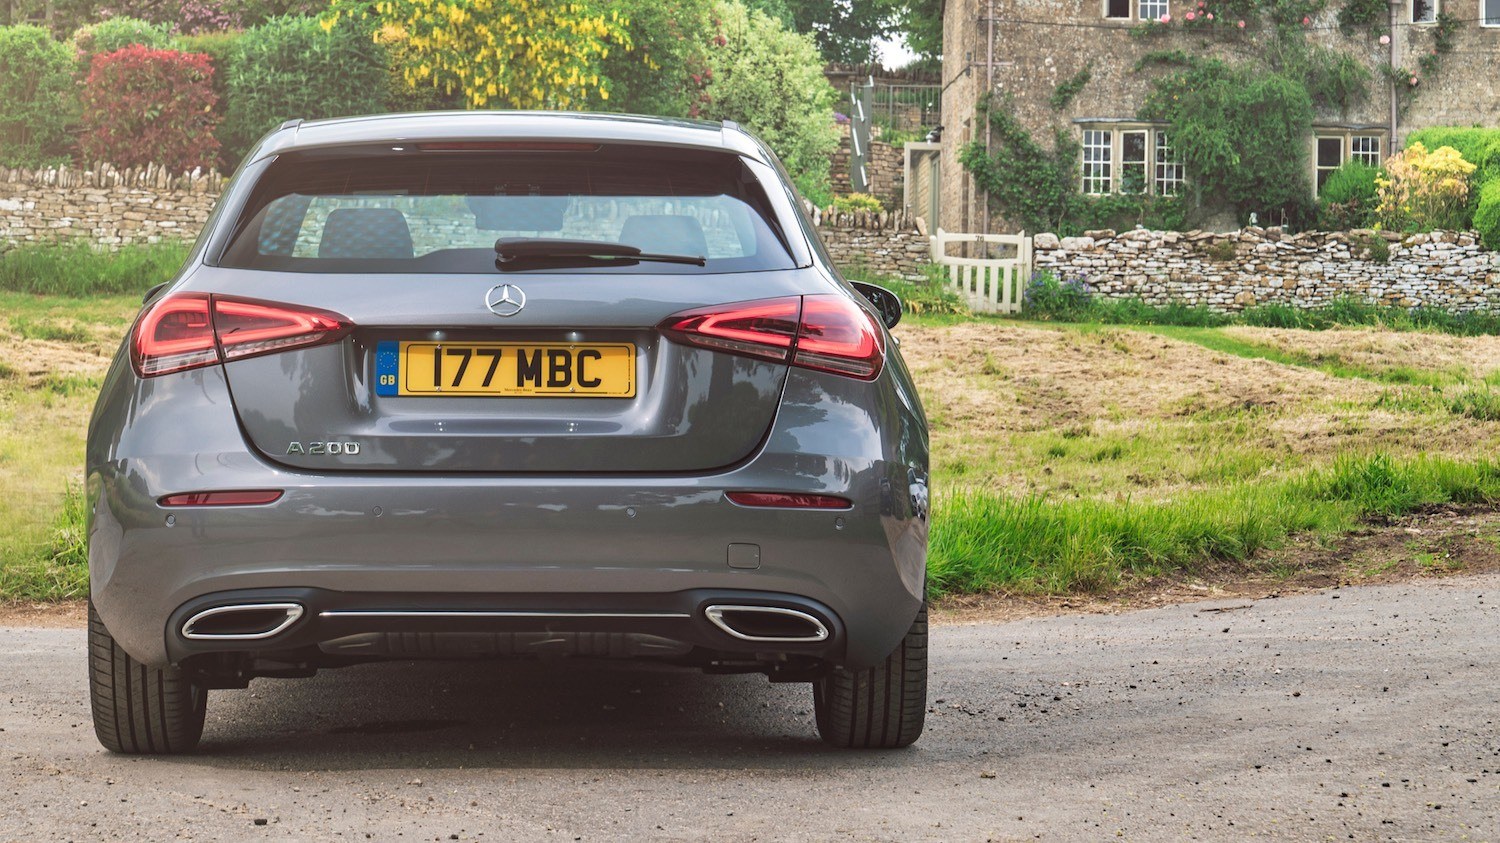 Tim Barnes-Clay reviews the New Mercedes-Benz A-Class 28